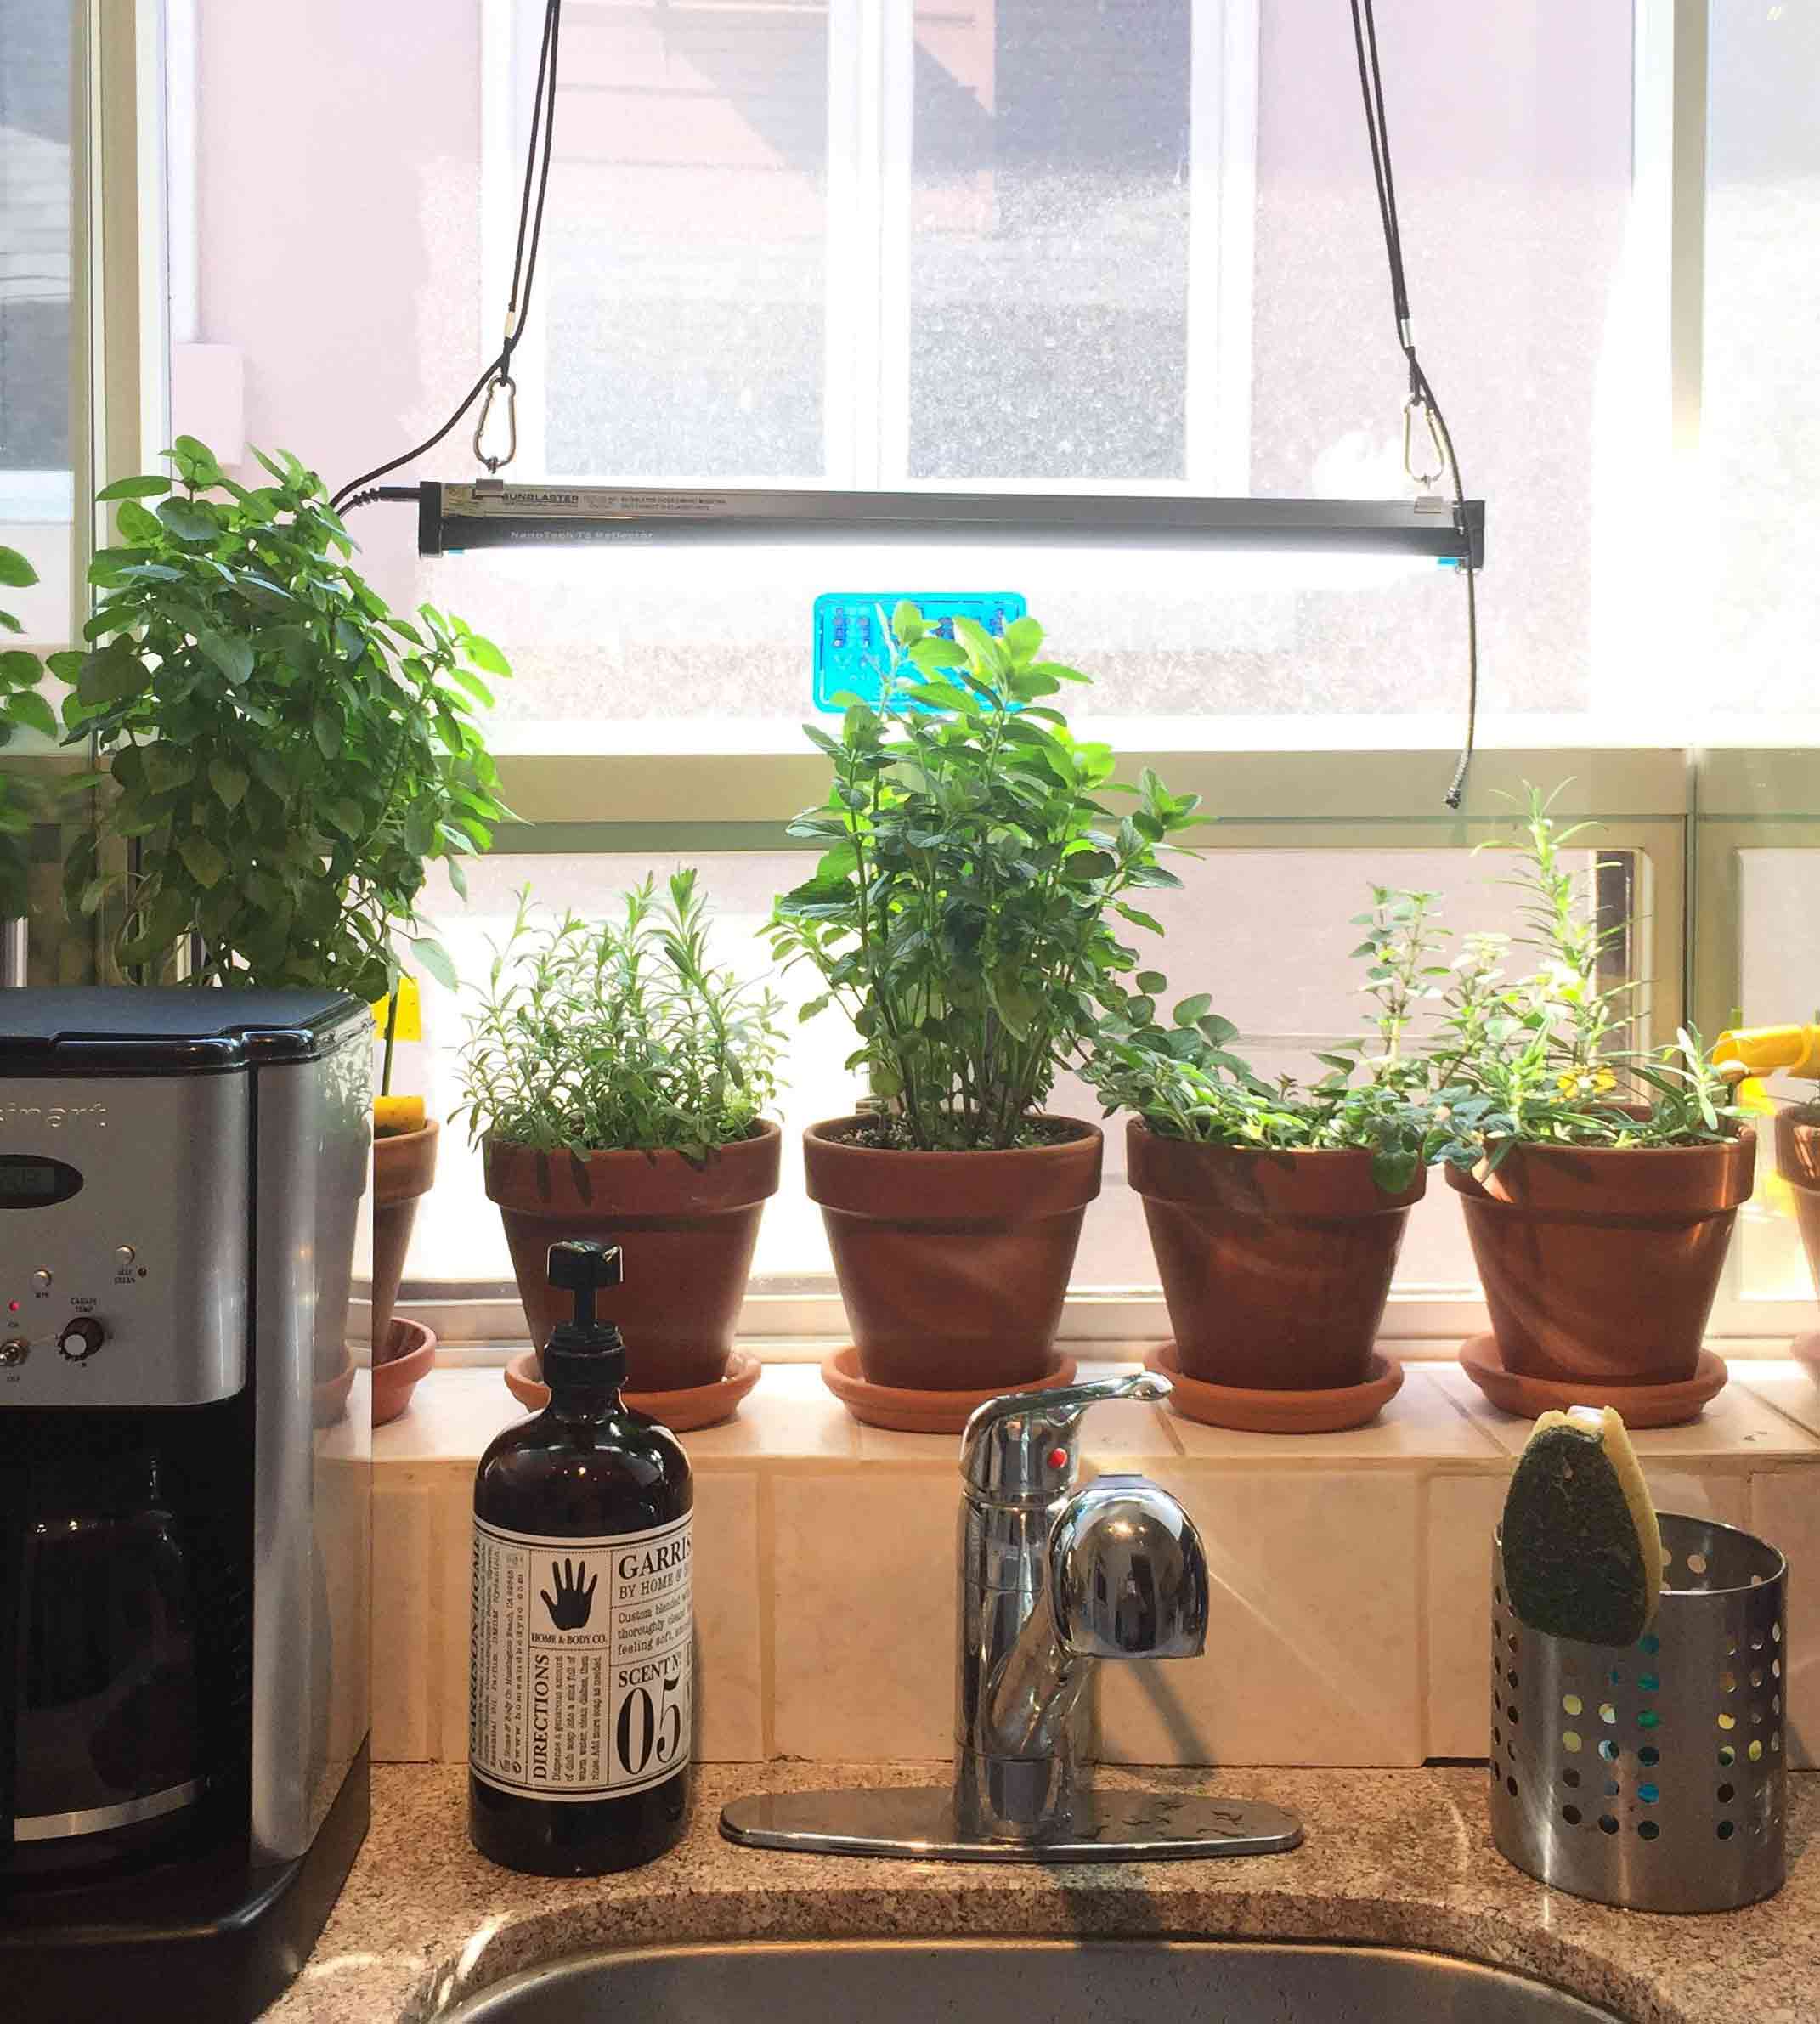 Indoor herb garden setup on the windowsill, from left to right: columnar basil, english lavender, spearmint, greek oregano, and rosemary